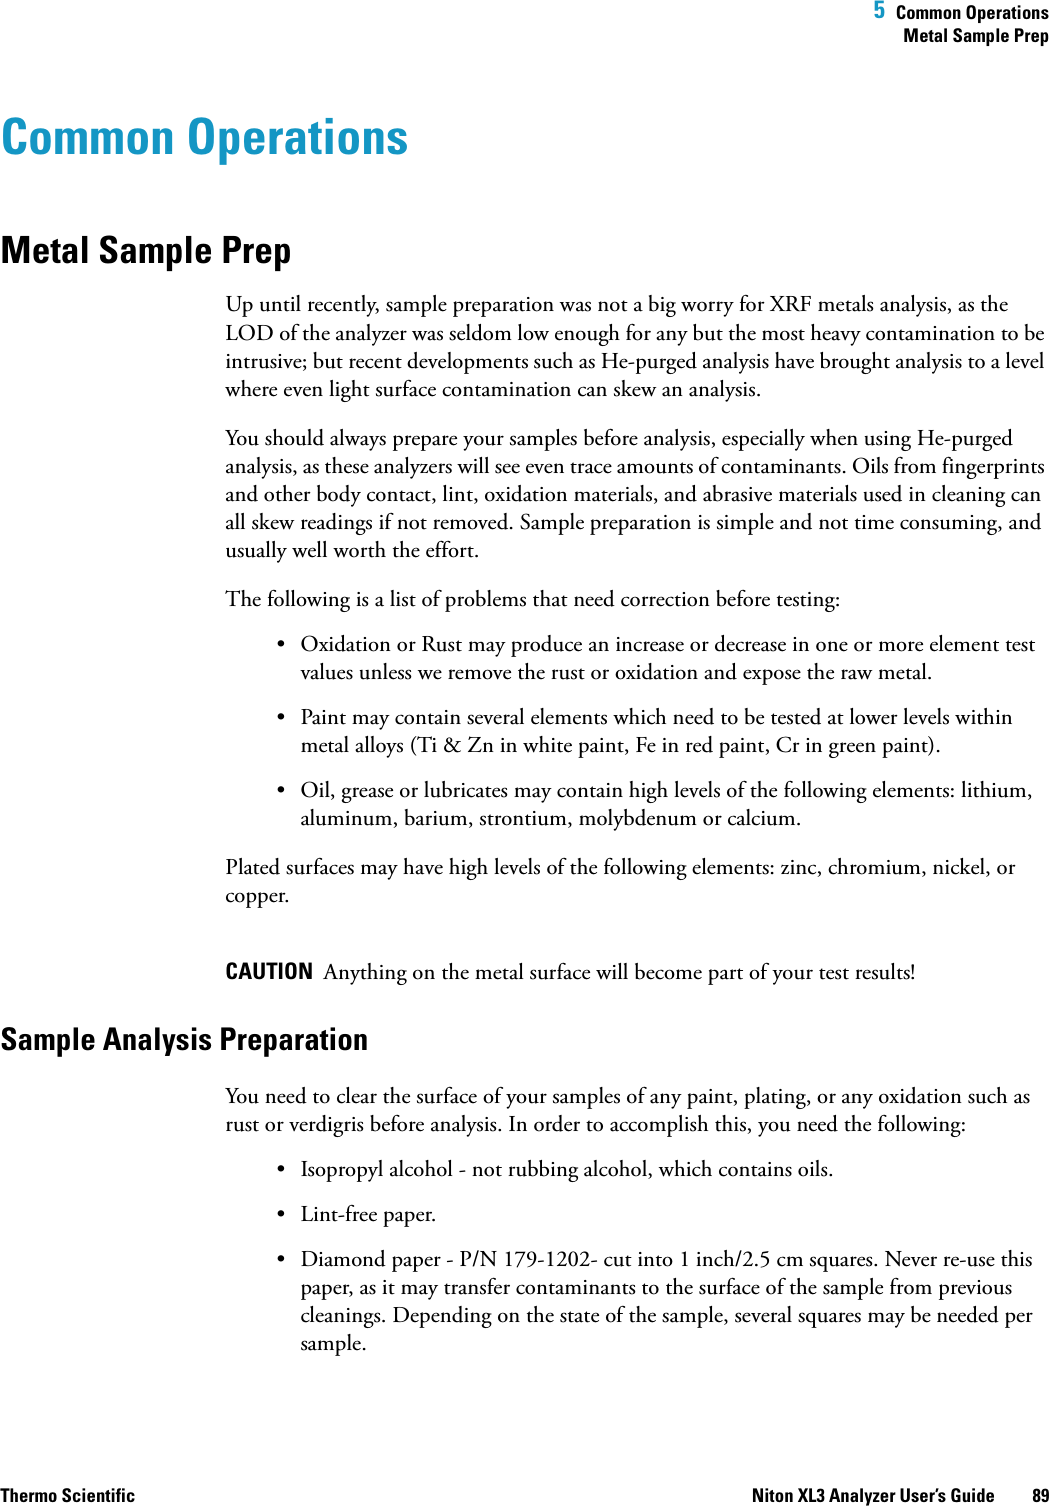  5  Common OperationsMetal Sample PrepThermo Scientific Niton XL3 Analyzer User’s Guide 89Common OperationsMetal Sample PrepUp until recently, sample preparation was not a big worry for XRF metals analysis, as the LOD of the analyzer was seldom low enough for any but the most heavy contamination to be intrusive; but recent developments such as He-purged analysis have brought analysis to a level where even light surface contamination can skew an analysis.You should always prepare your samples before analysis, especially when using He-purged analysis, as these analyzers will see even trace amounts of contaminants. Oils from fingerprints and other body contact, lint, oxidation materials, and abrasive materials used in cleaning can all skew readings if not removed. Sample preparation is simple and not time consuming, and usually well worth the effort. The following is a list of problems that need correction before testing:• Oxidation or Rust may produce an increase or decrease in one or more element test values unless we remove the rust or oxidation and expose the raw metal.• Paint may contain several elements which need to be tested at lower levels within metal alloys (Ti &amp; Zn in white paint, Fe in red paint, Cr in green paint).• Oil, grease or lubricates may contain high levels of the following elements: lithium, aluminum, barium, strontium, molybdenum or calcium.Plated surfaces may have high levels of the following elements: zinc, chromium, nickel, or copper.CAUTION  Anything on the metal surface will become part of your test results!Sample Analysis PreparationYou need to clear the surface of your samples of any paint, plating, or any oxidation such as rust or verdigris before analysis. In order to accomplish this, you need the following:• Isopropyl alcohol - not rubbing alcohol, which contains oils.• Lint-free paper.• Diamond paper - P/N 179-1202- cut into 1 inch/2.5 cm squares. Never re-use this paper, as it may transfer contaminants to the surface of the sample from previous cleanings. Depending on the state of the sample, several squares may be needed per sample.